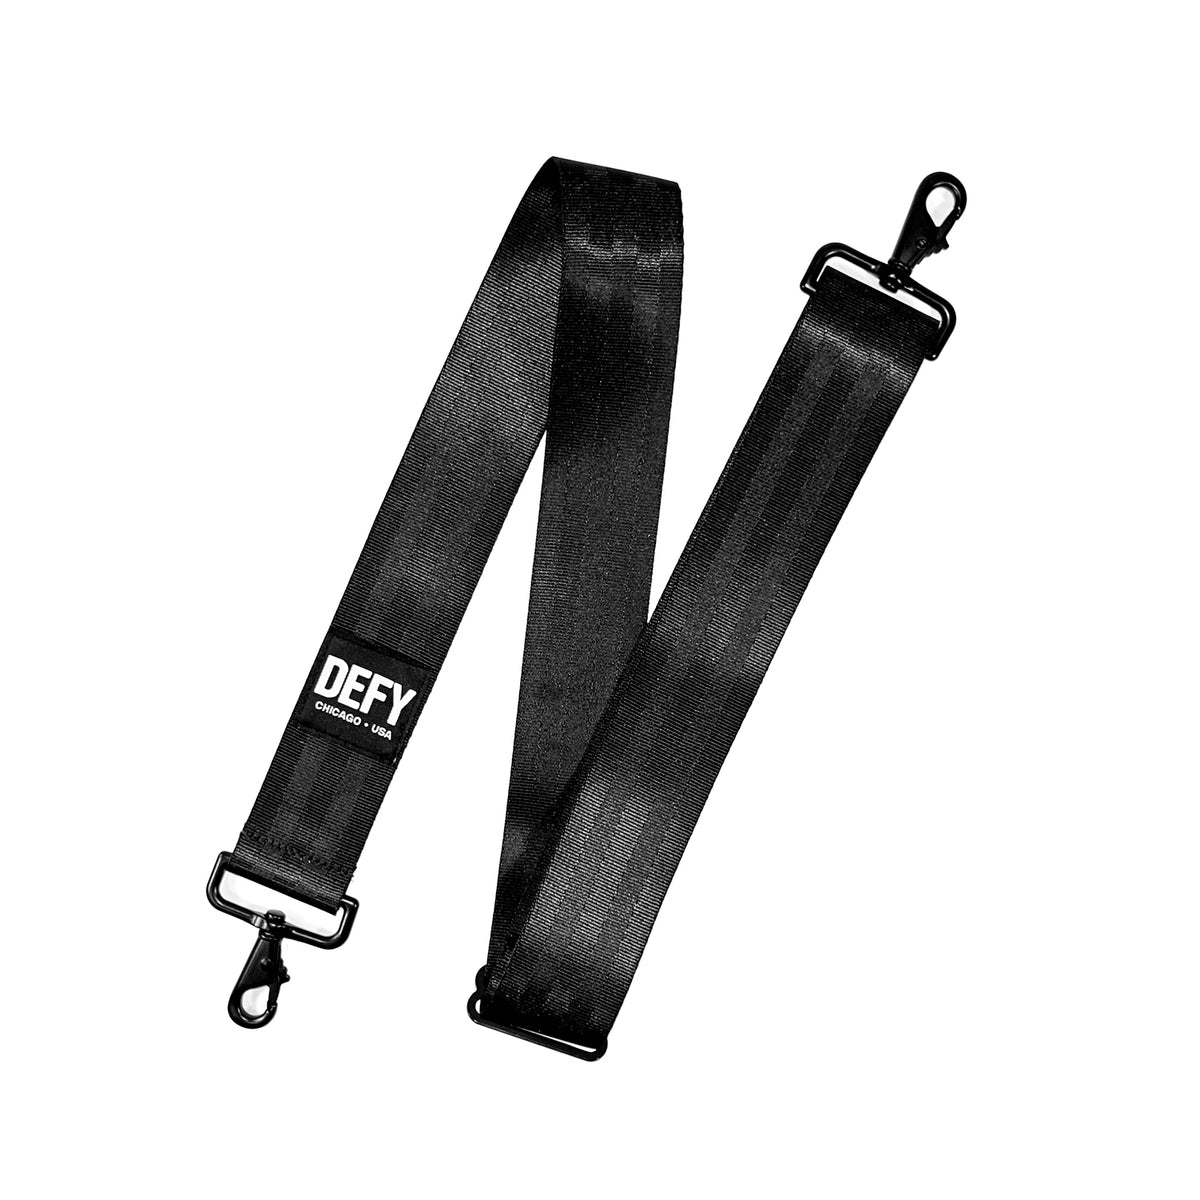 2 Swivel Hooks  For optional use on The Ultimate Strap – DEFY